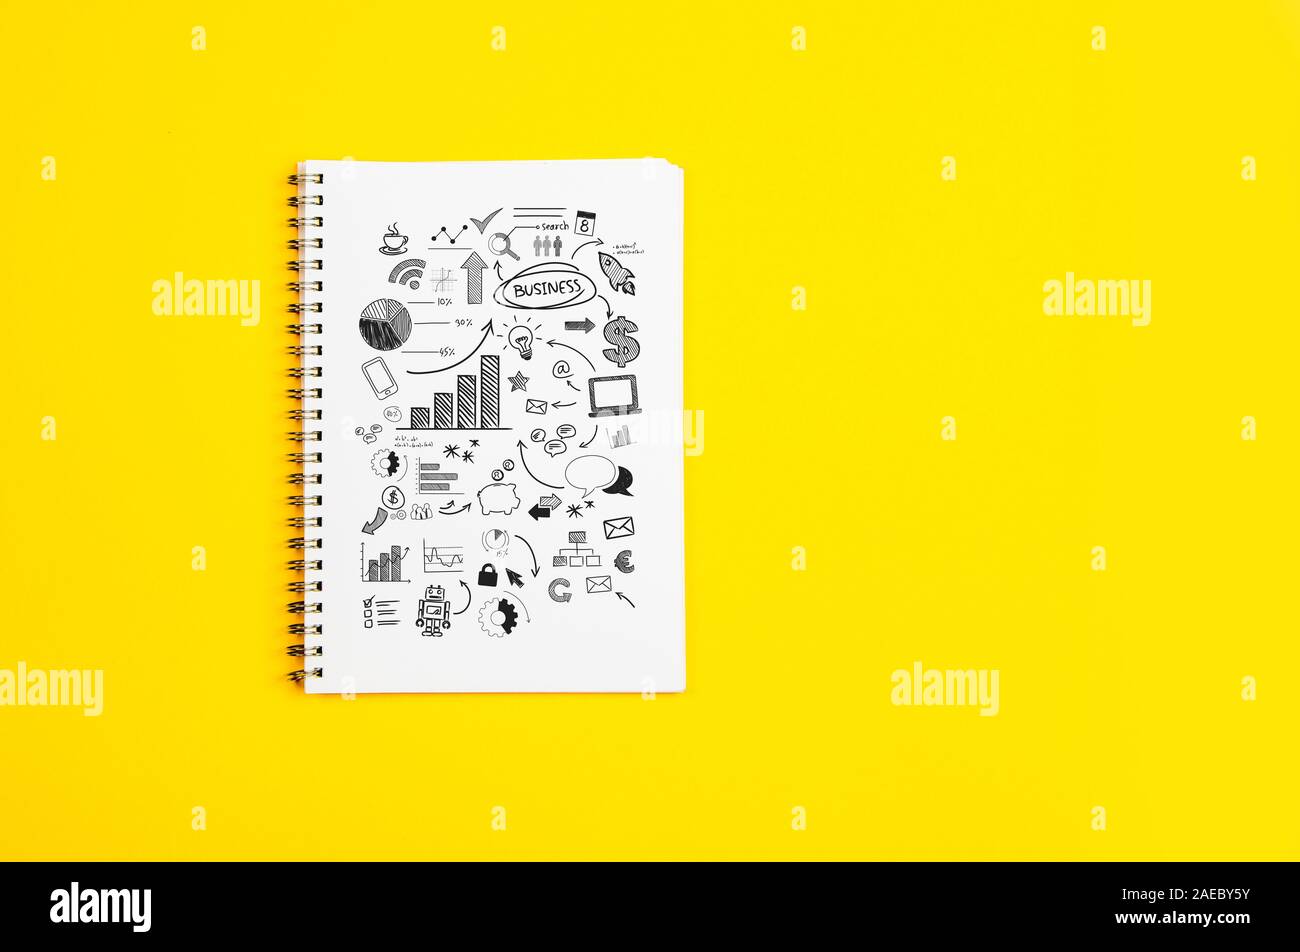 White paper page with doodles and business strategies on a yellow background Stock Photo